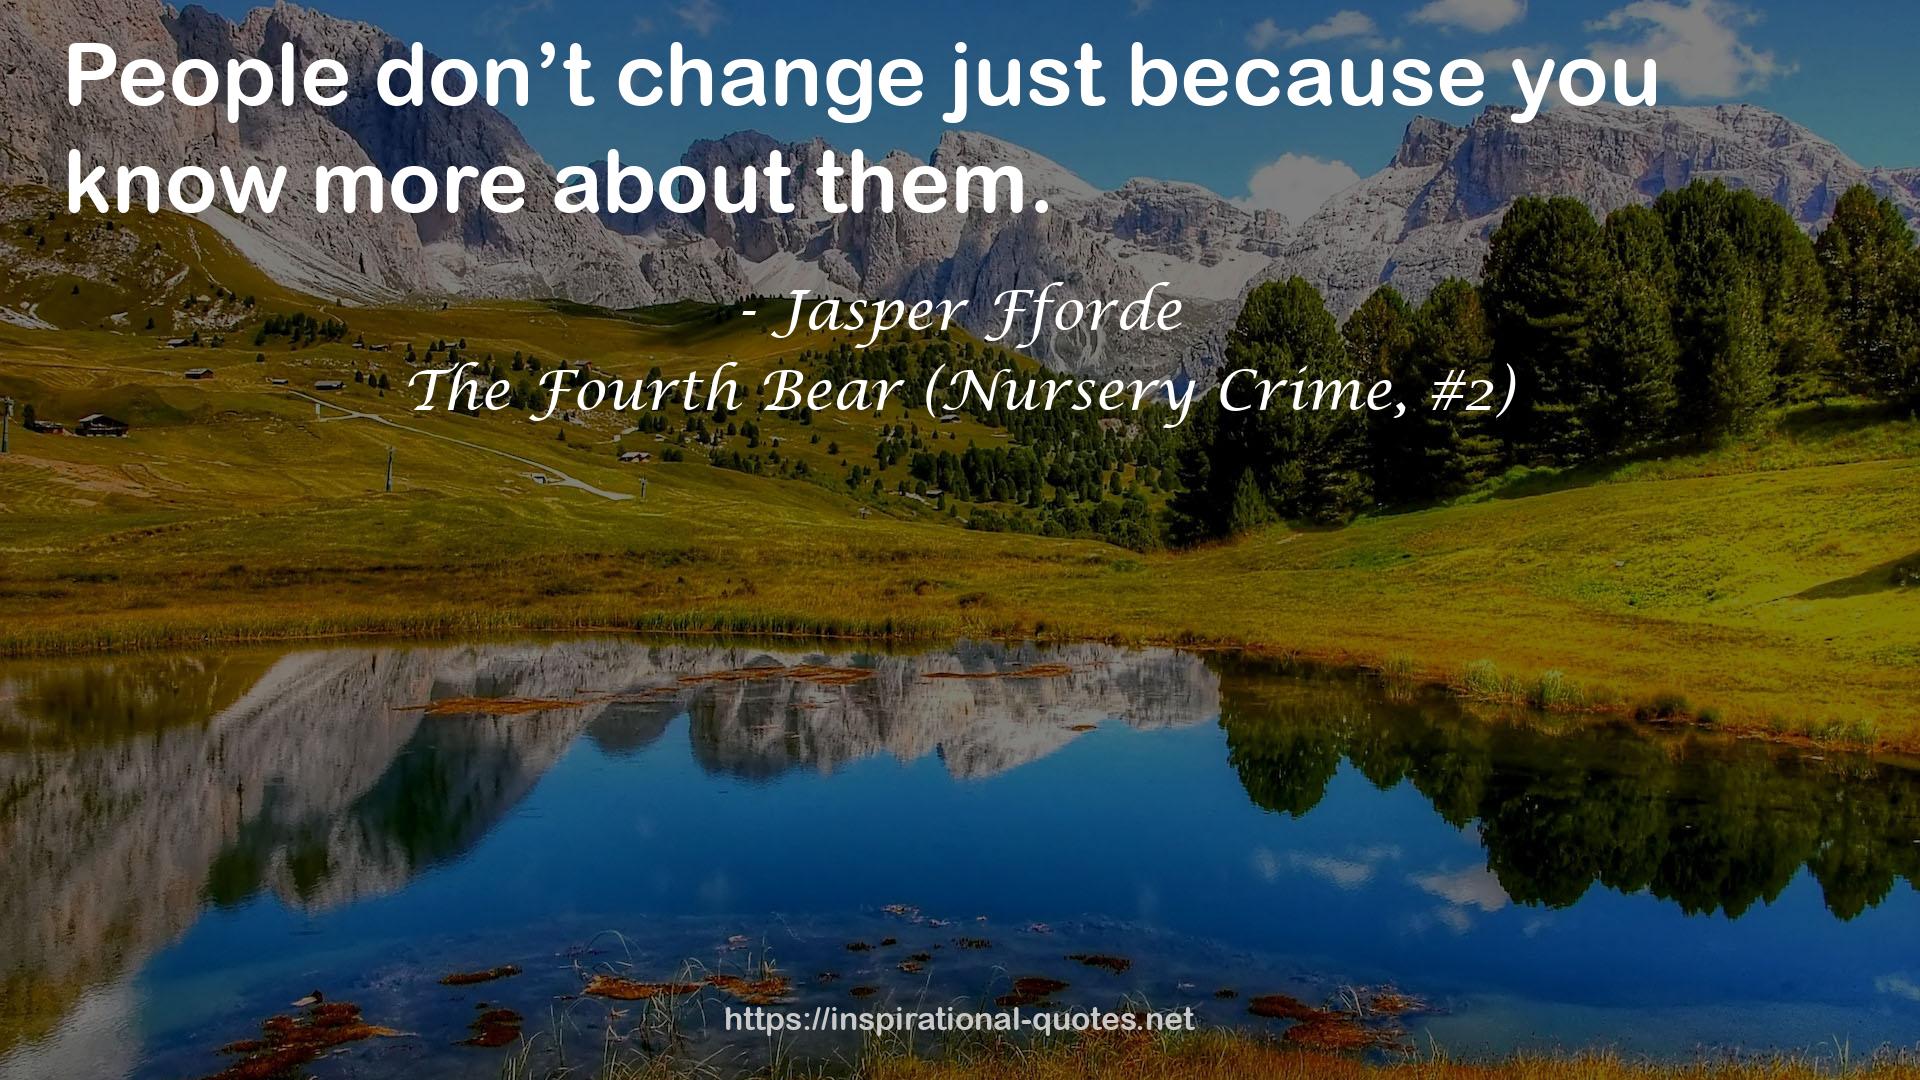 The Fourth Bear (Nursery Crime, #2) QUOTES